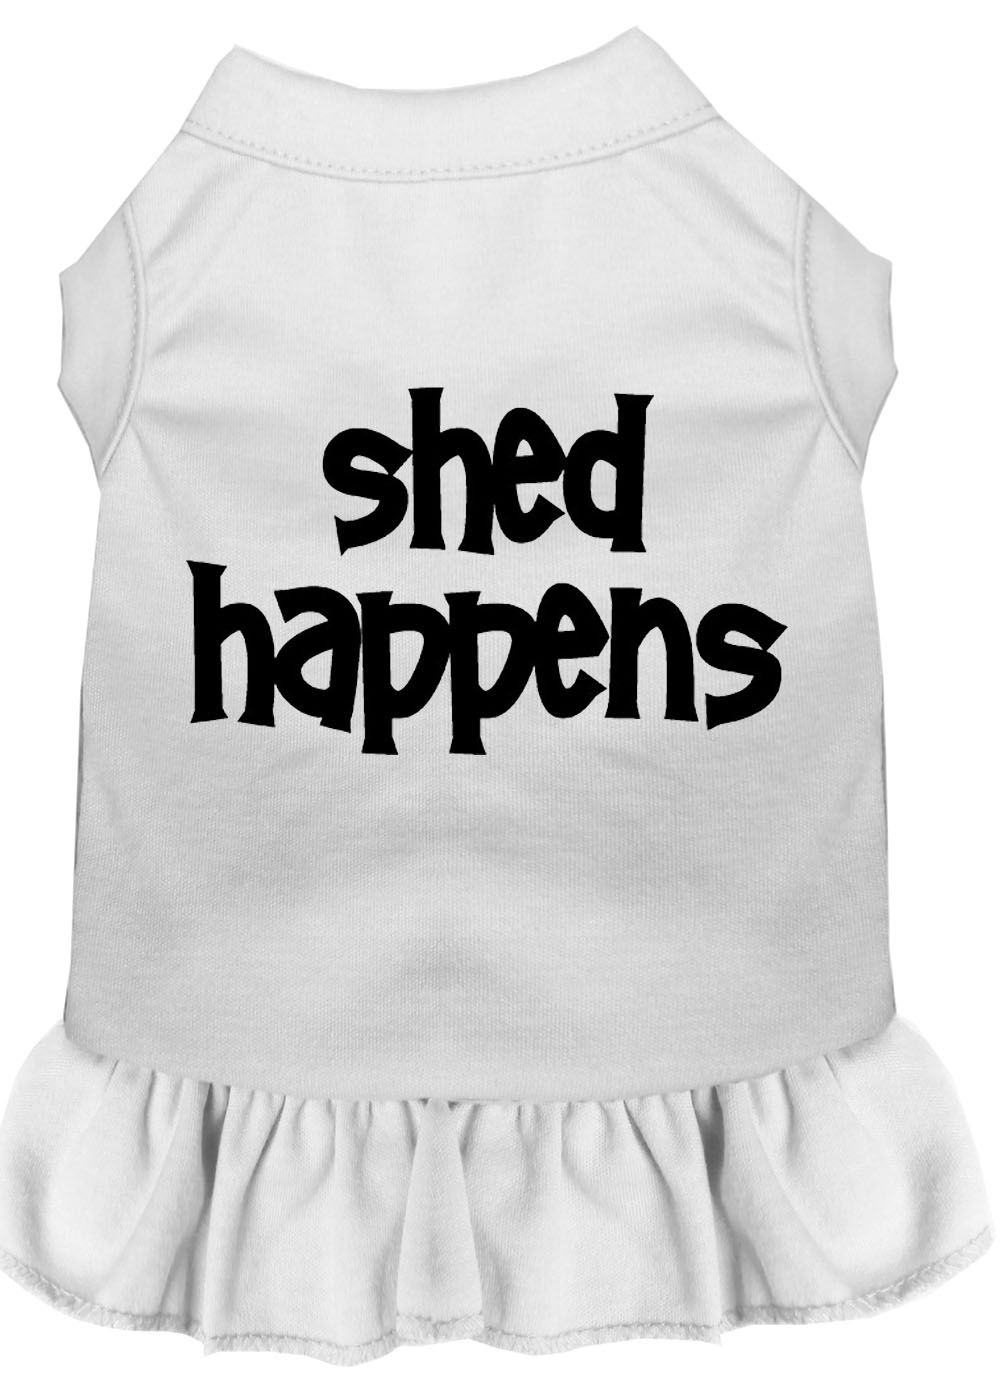 Shed Happens Screen Print Dress White Med GreatEagleInc